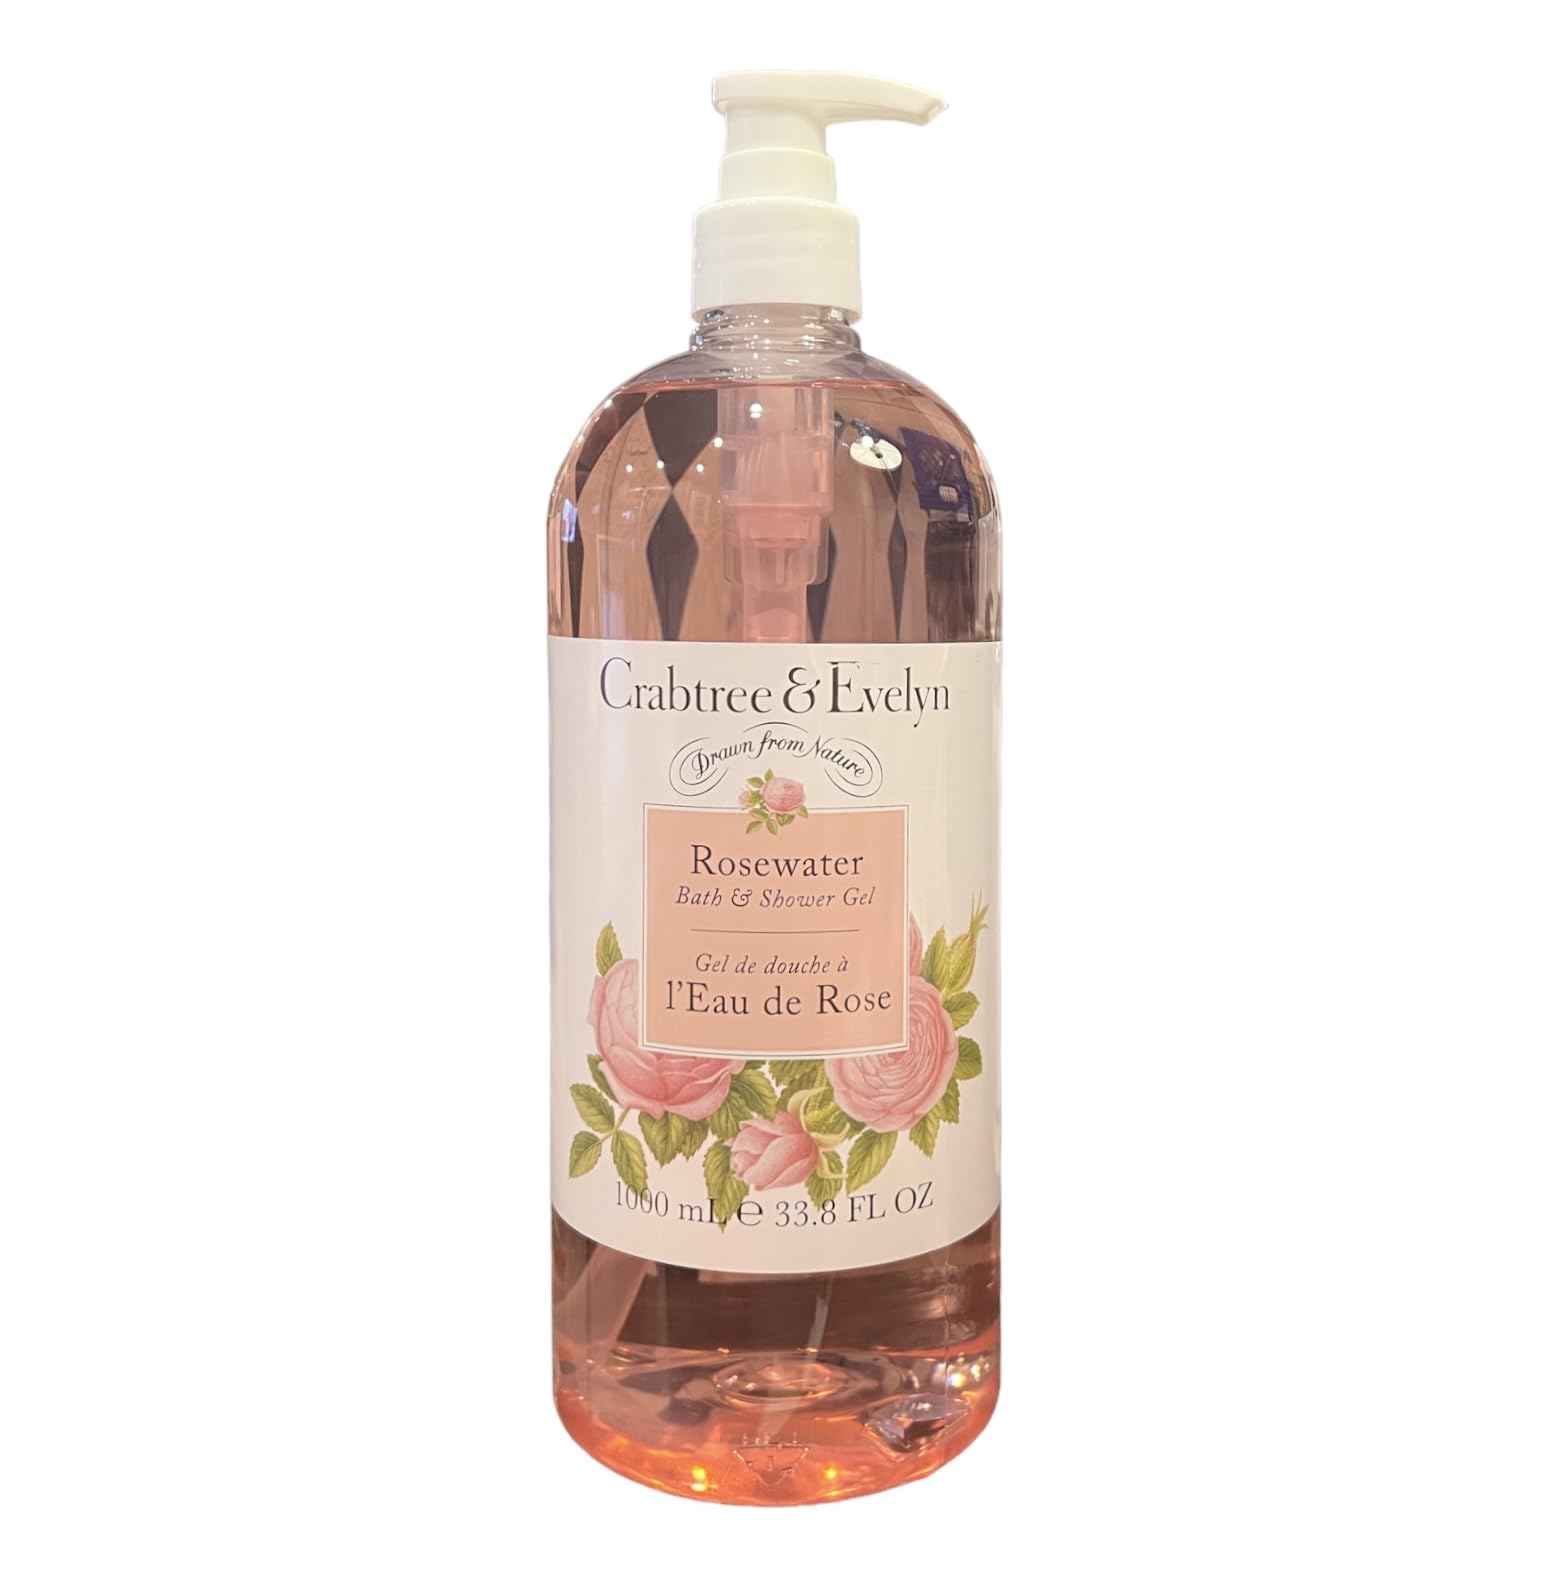 Crabtree & Evelyn Rosewater Bath and Shower Gel Jumbo Size 33.8 Fl Oz